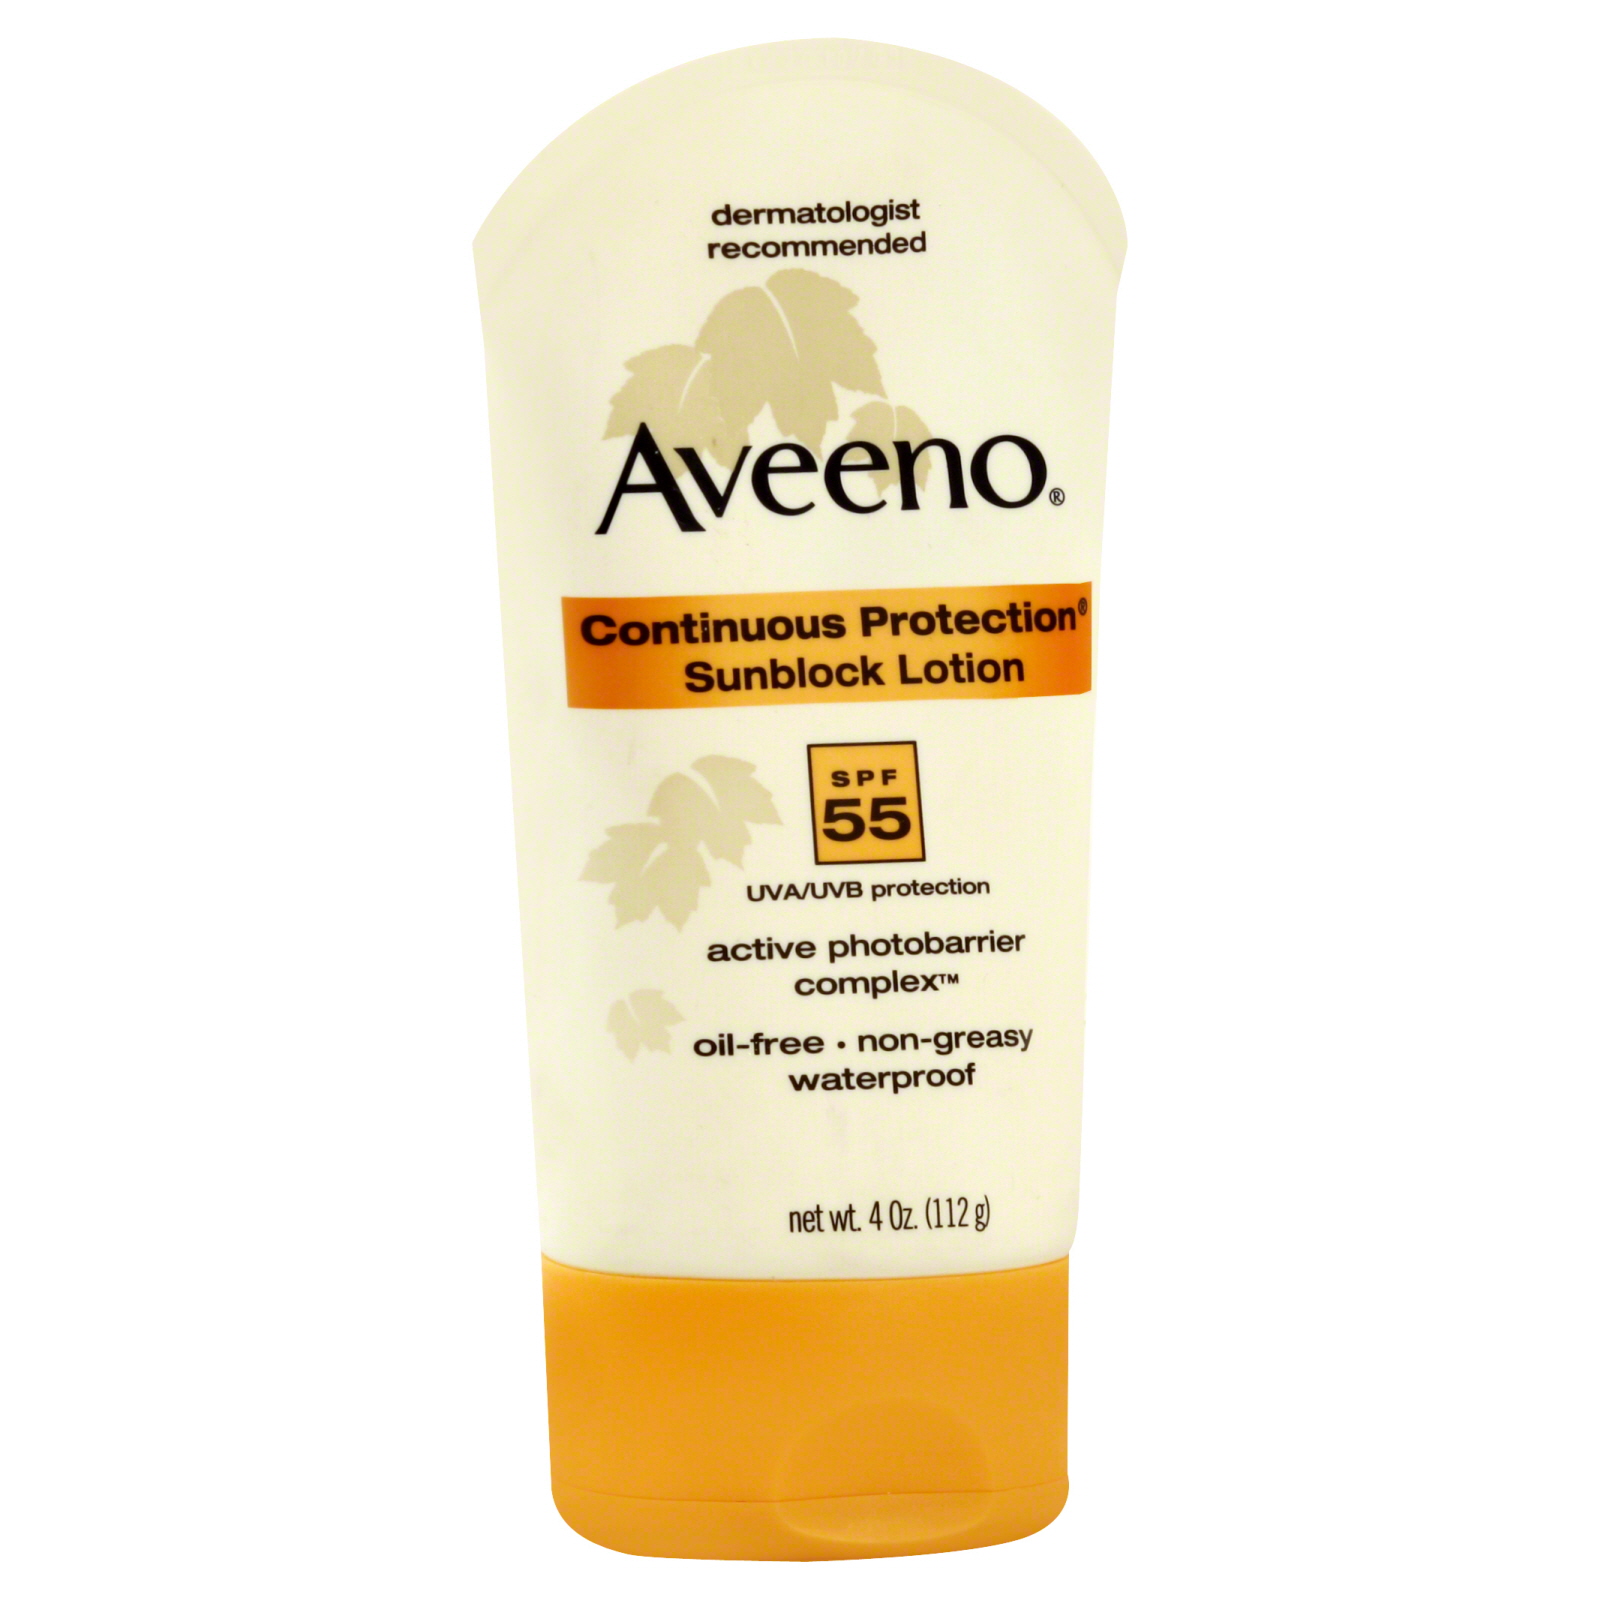 Aveeno Sunblock Lotion, Continuous Protection, SPF 55, 4 oz (112 g)